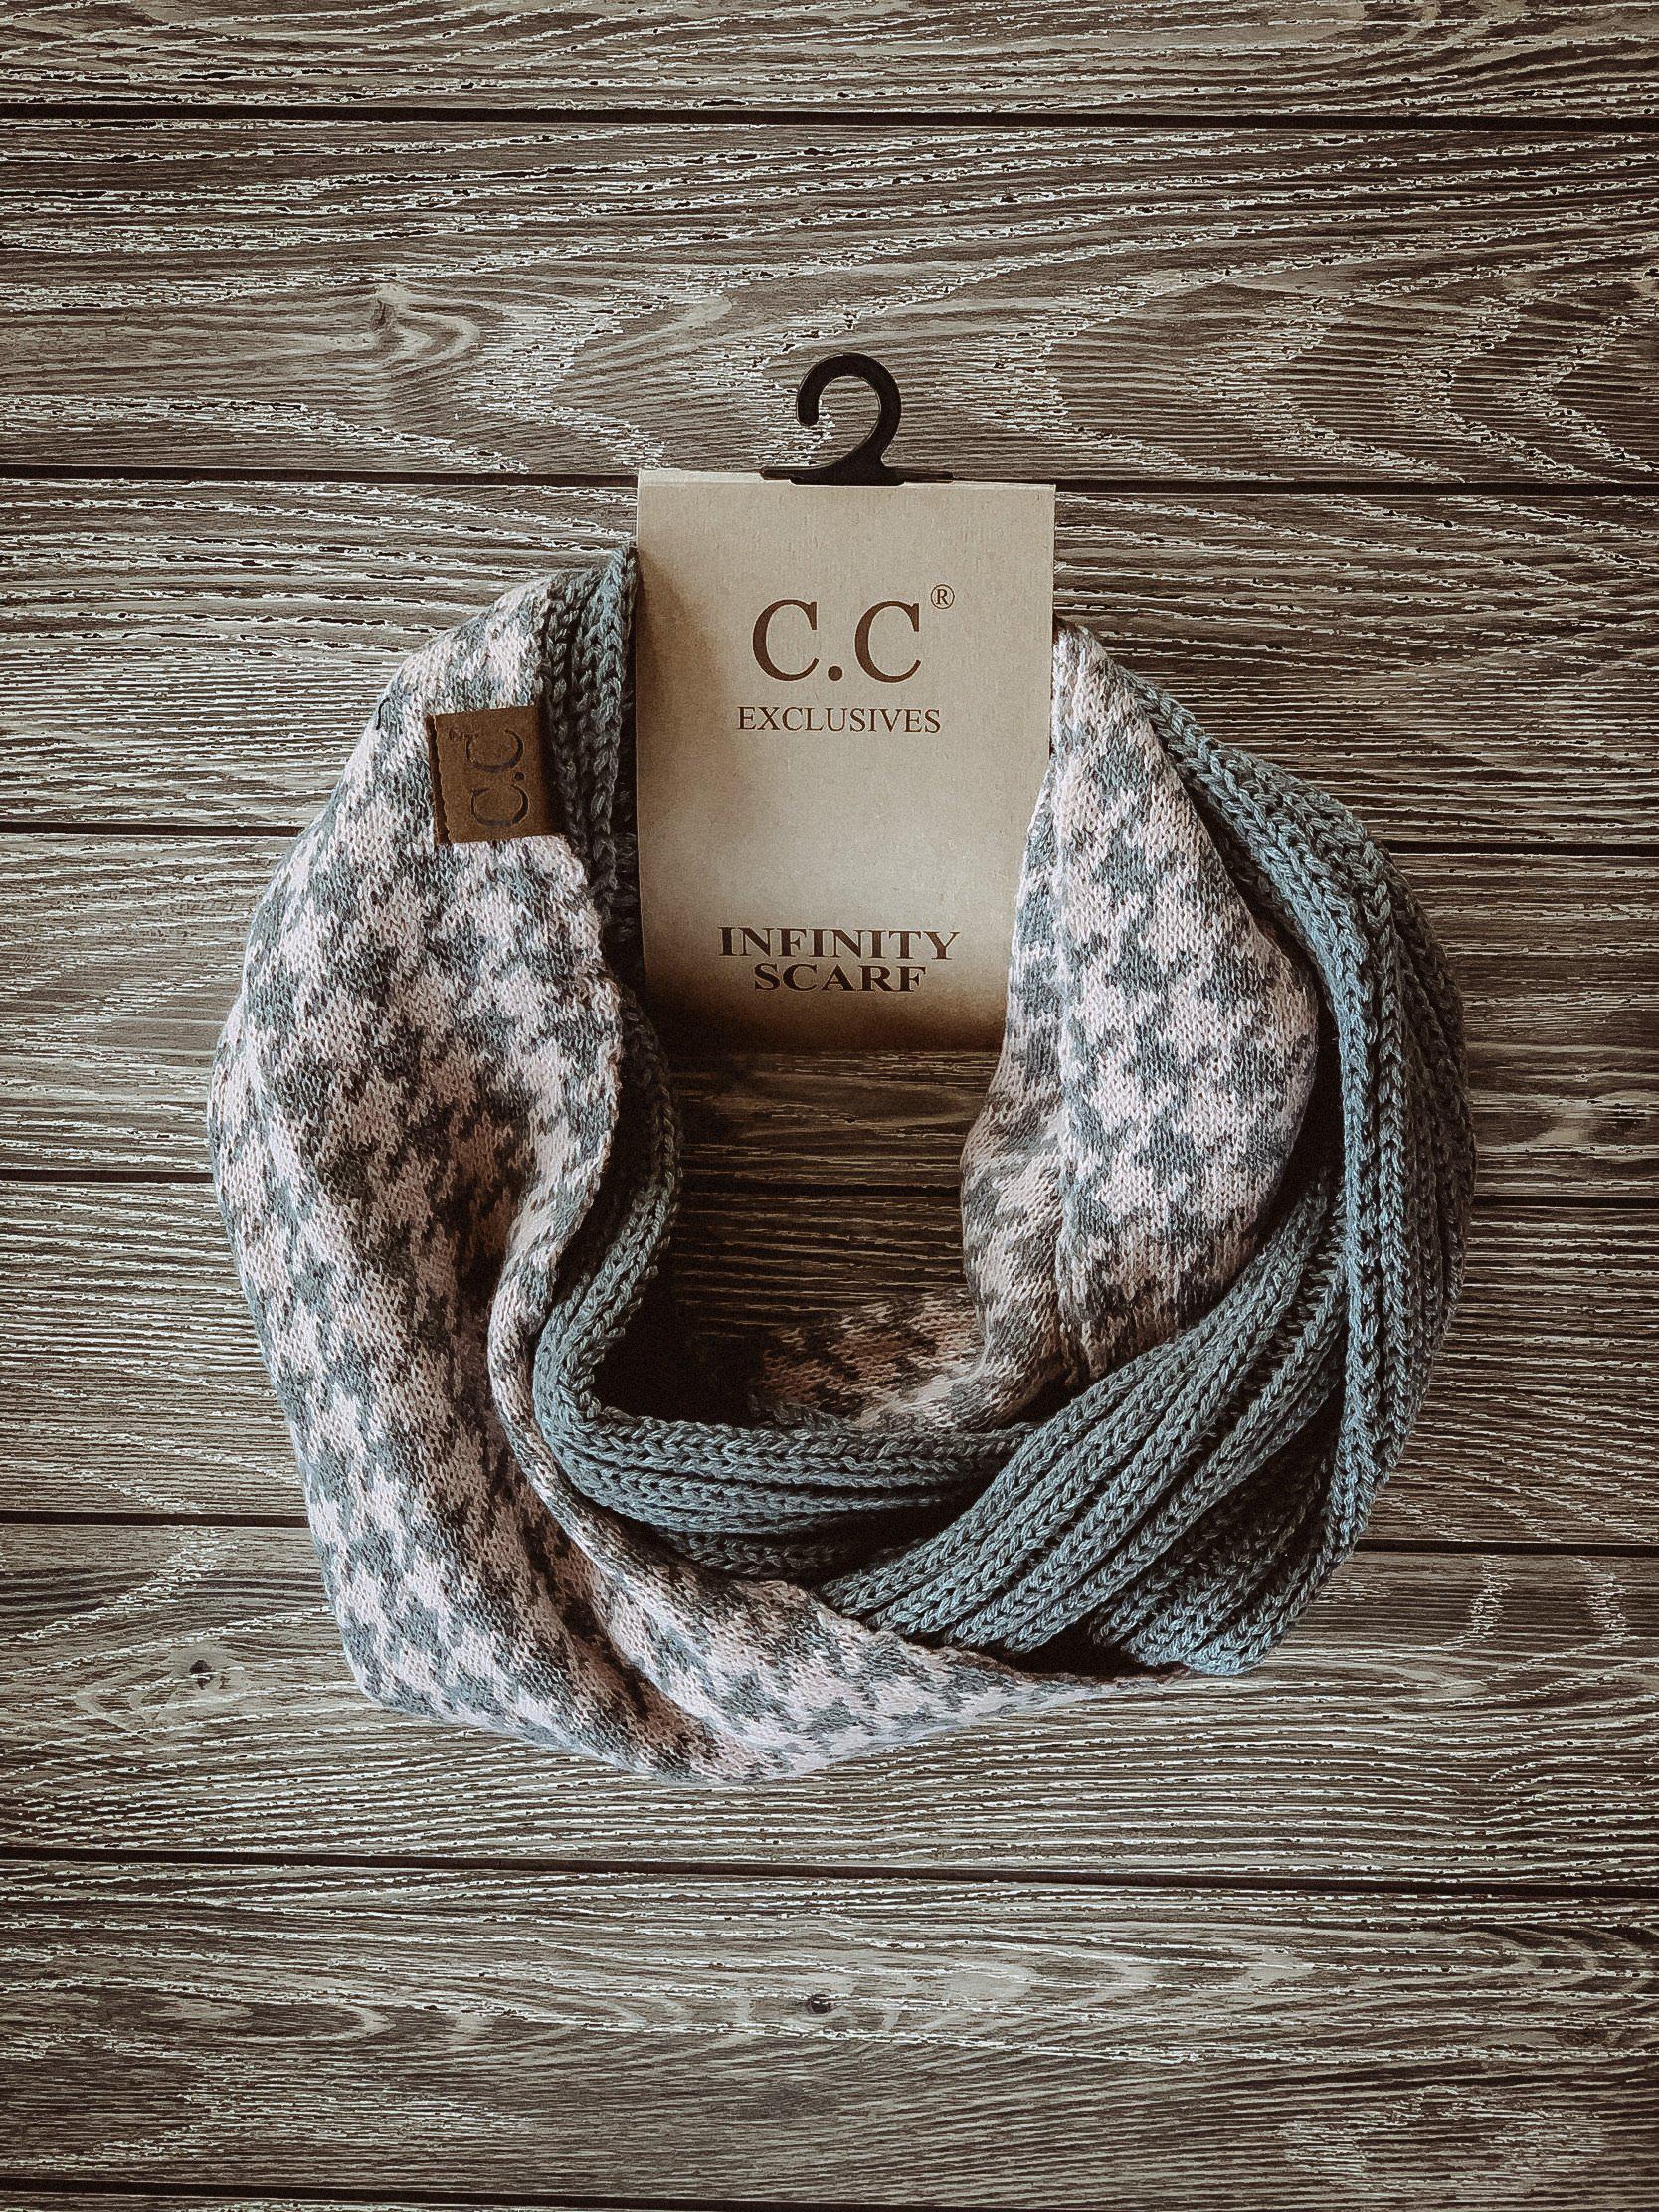 Houndstooth CC Infinity Scarf - Light Grey/Indie Pink